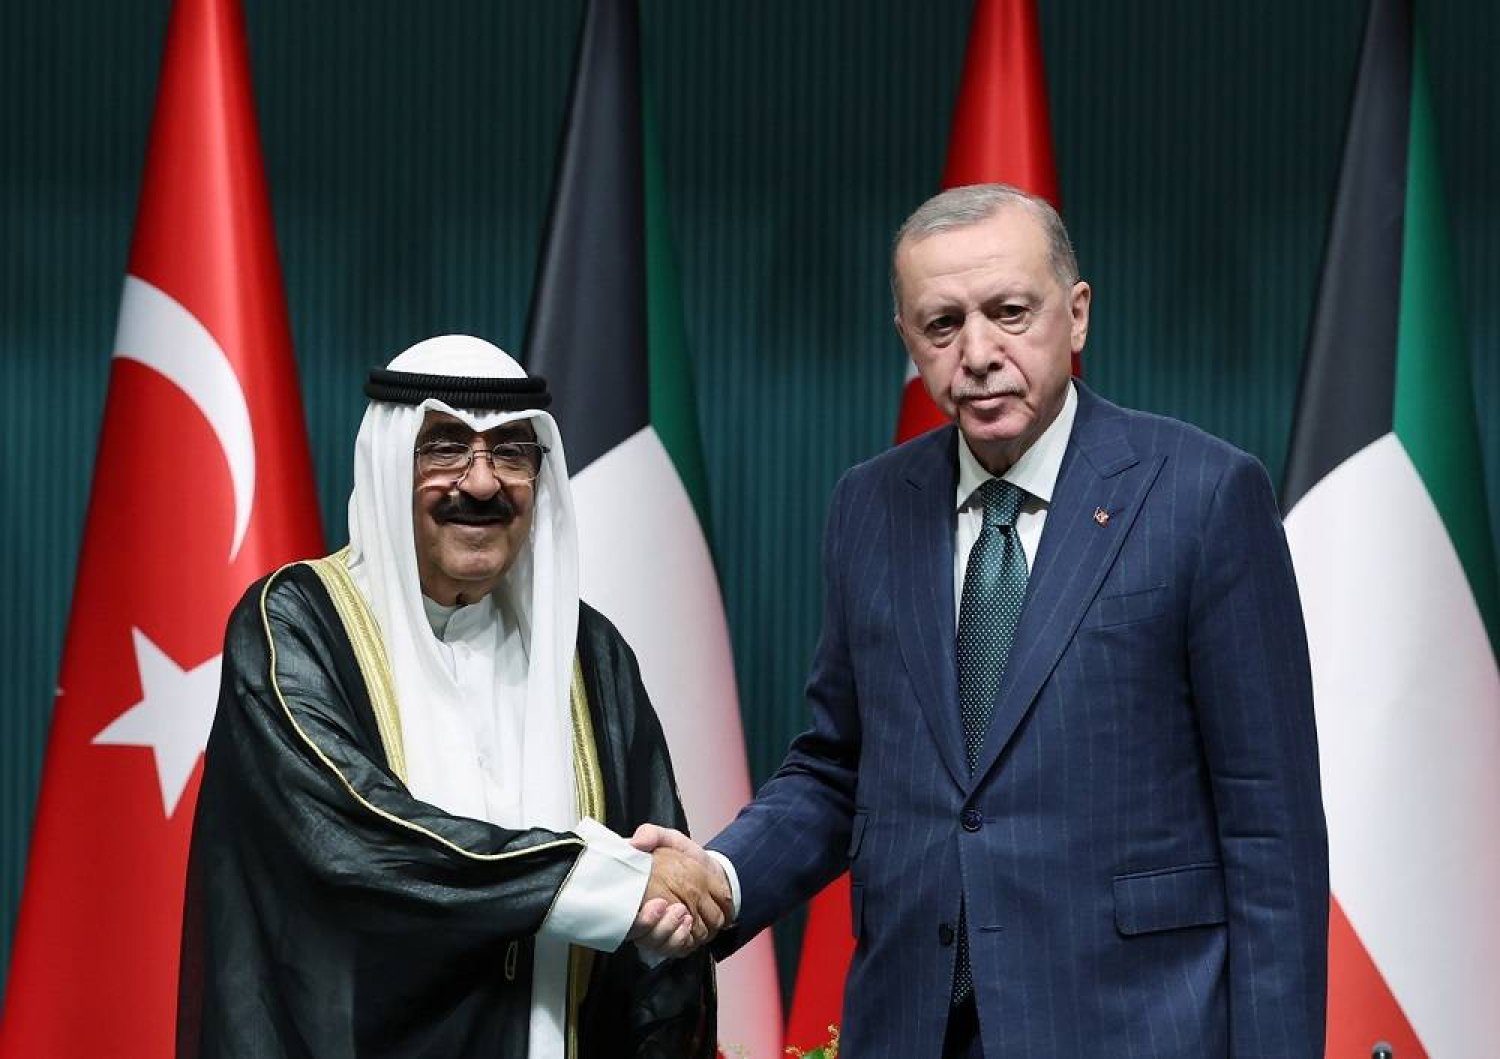 A handout photo made available by the Turkish Presidential Press Office shows Turkish President Recep Tayyip Erdogan (R) and Emir of Kuwait Sheikh Meshal al-Ahmad Al-Jaber Al-Sabah (L) during a signing ceremony after their meeting at the Presidential Palace in Ankara, Turkey, 07 May 2024. (EPA/Turkish Presidential Press Office Handout) 